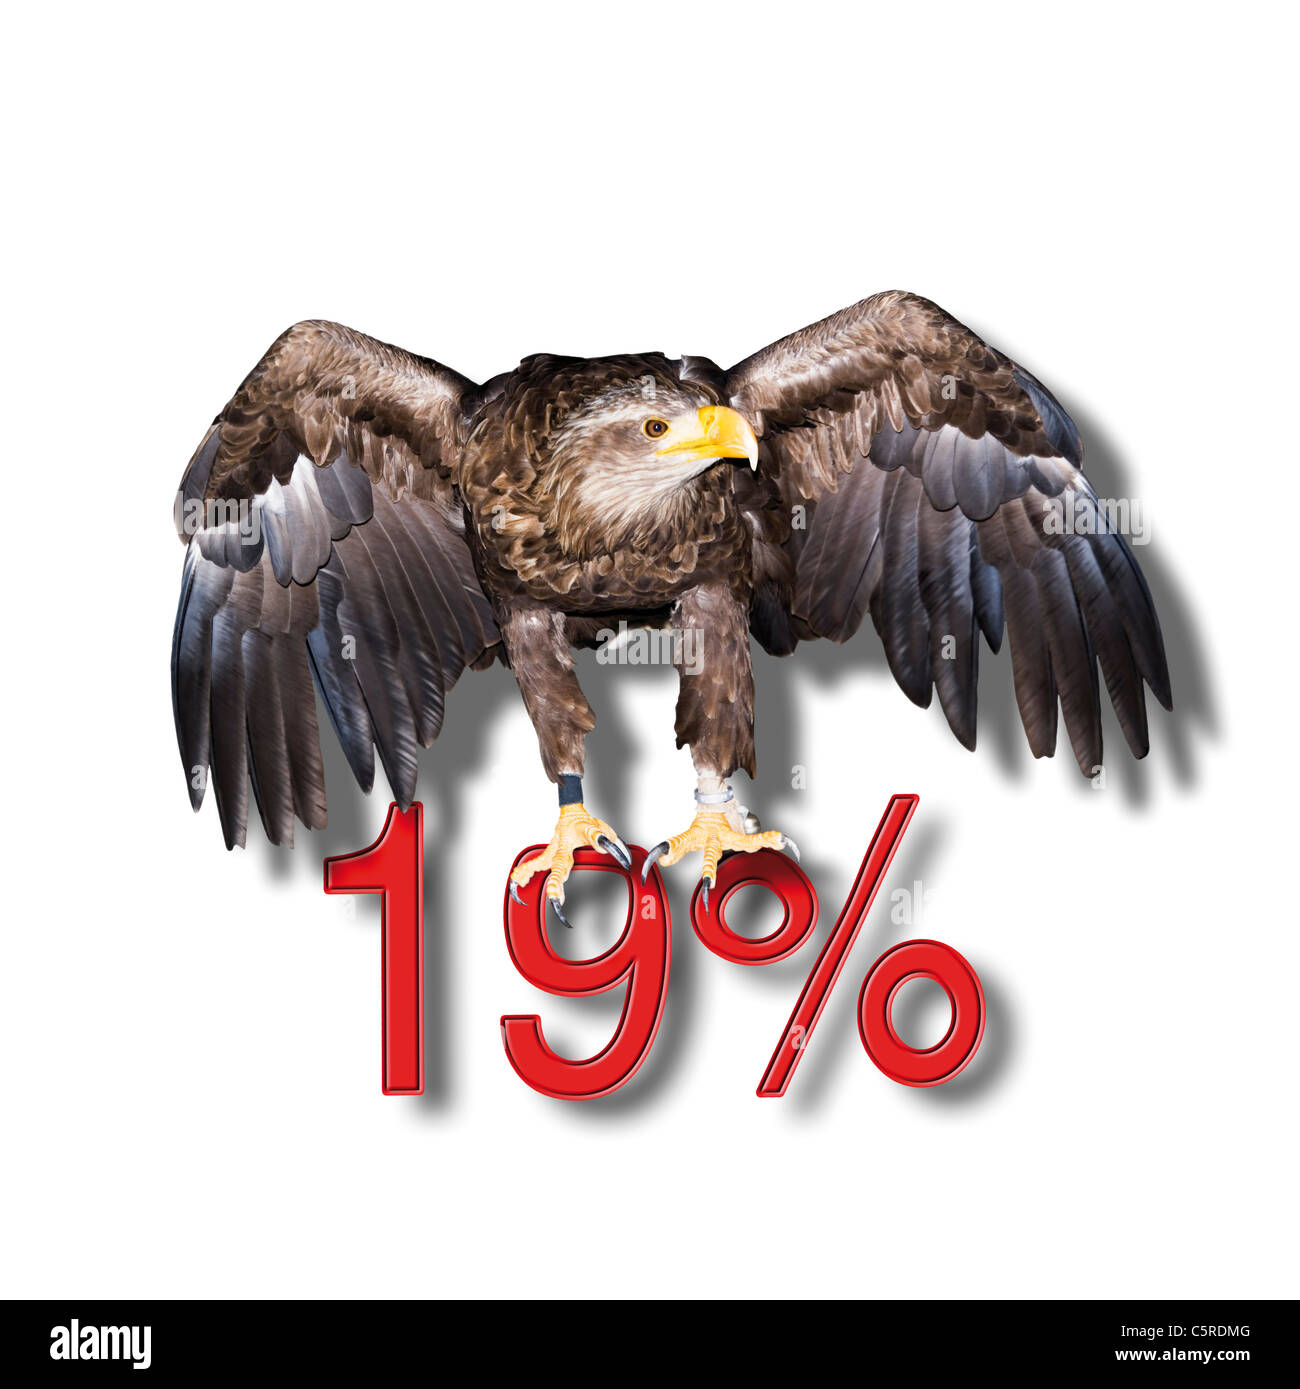 Federeal Eagle sitting on red 19 percent sign, symbol Stock Photo